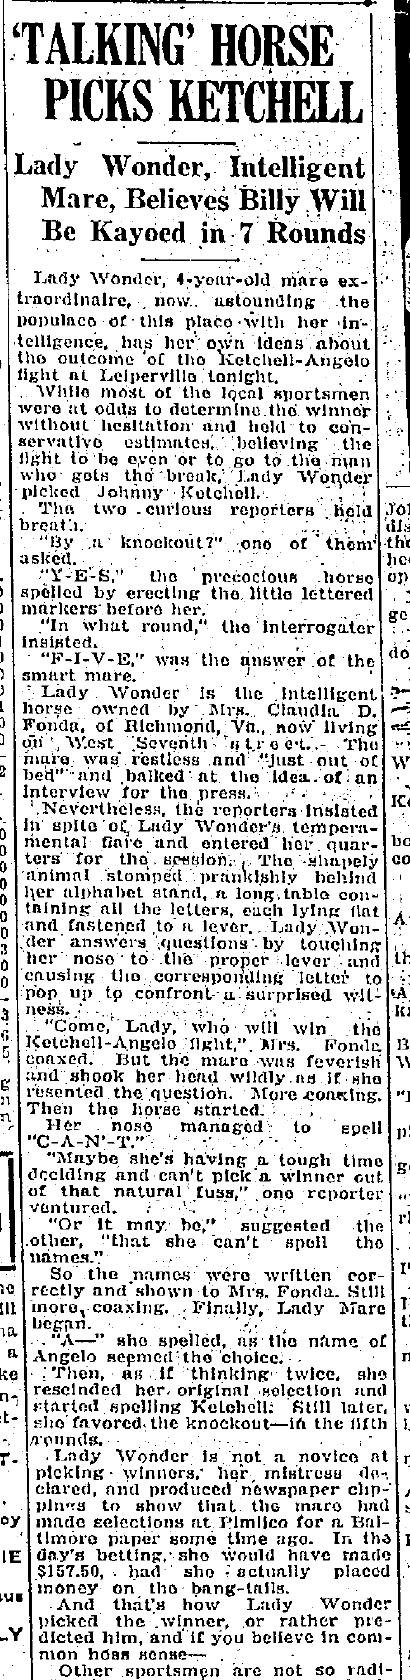 Chester Times August 19 1930 Boxing Prediction.png